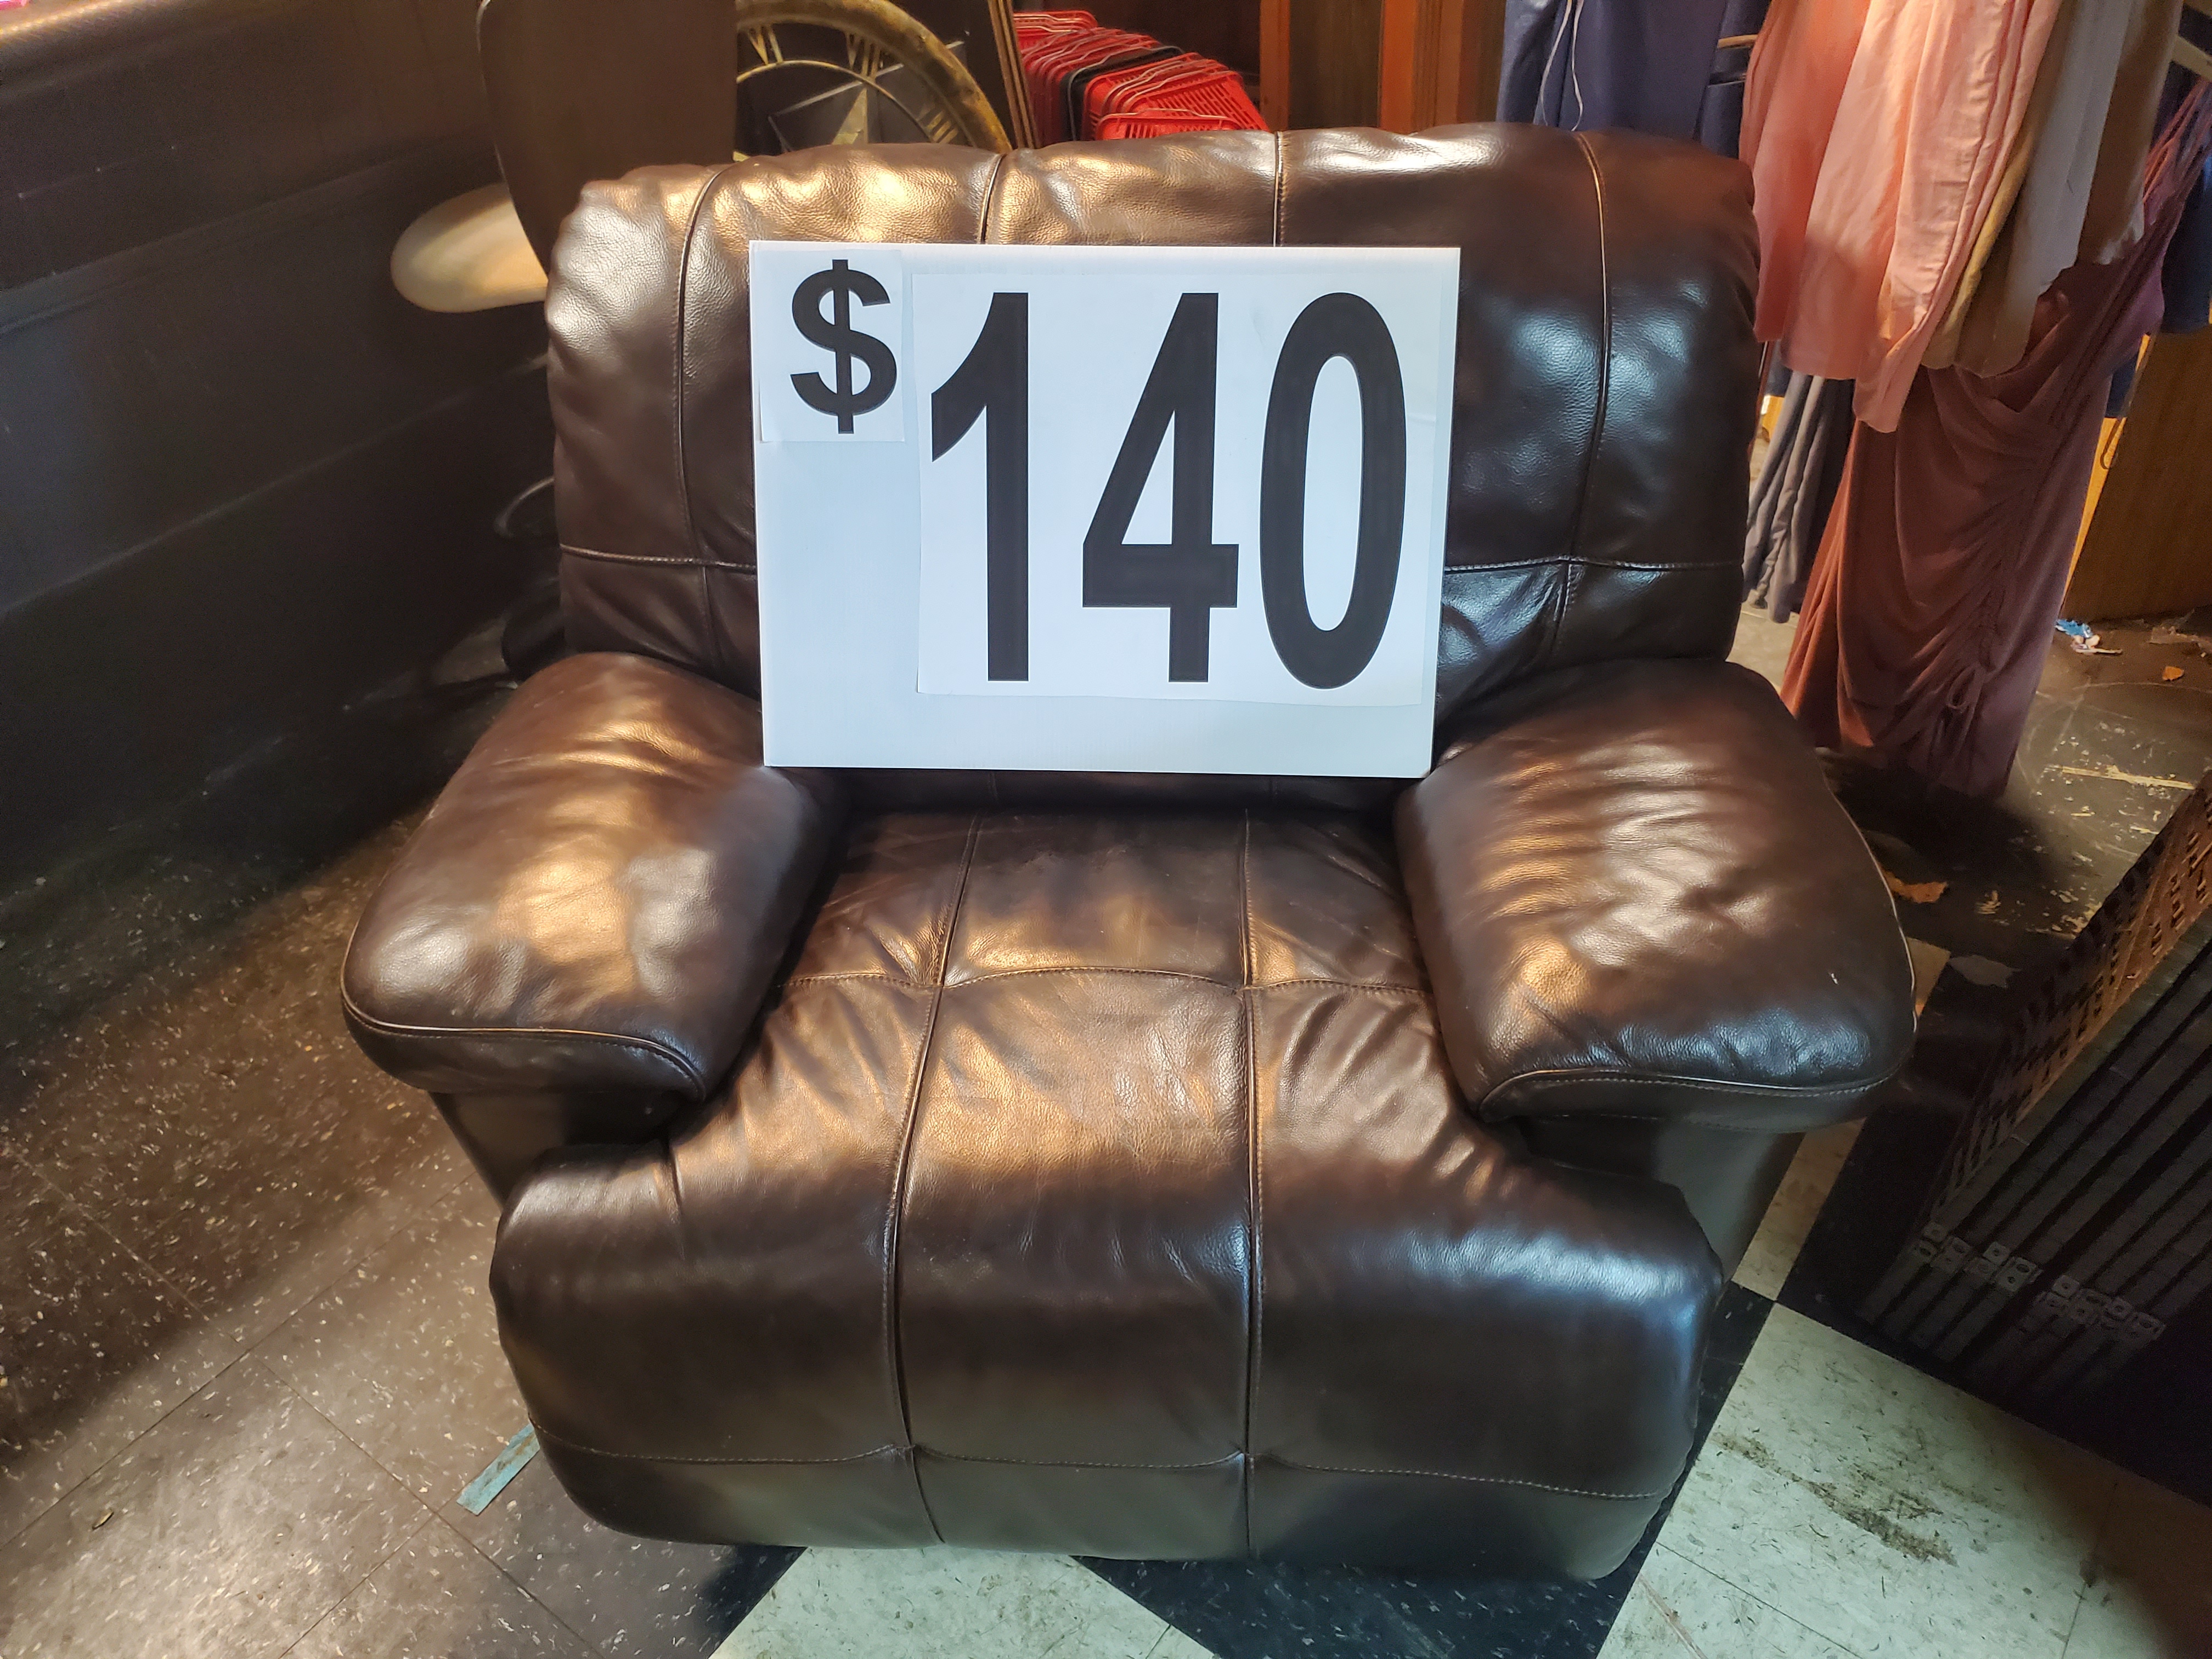 Wide recliner - good condition.  $140